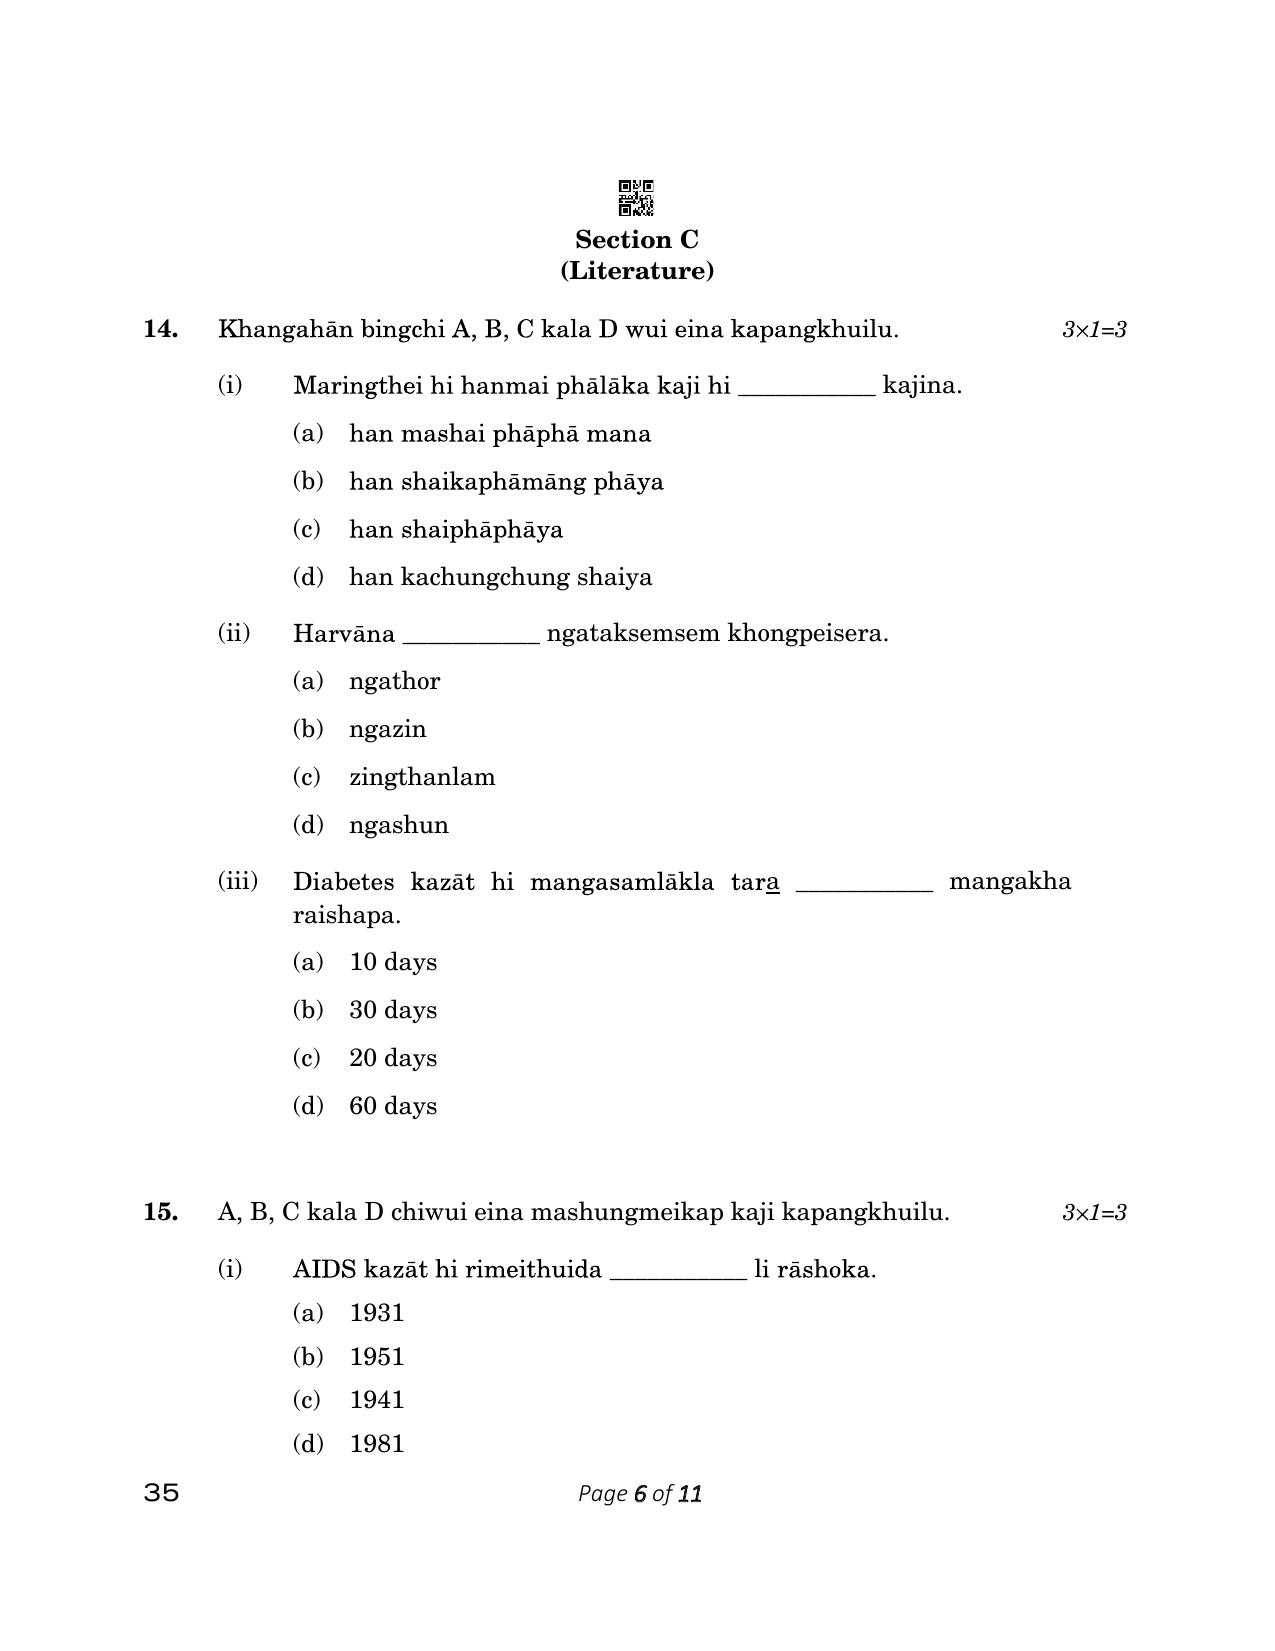 CBSE Class 12 35_Tangkhul 2023 Question Paper - Page 6